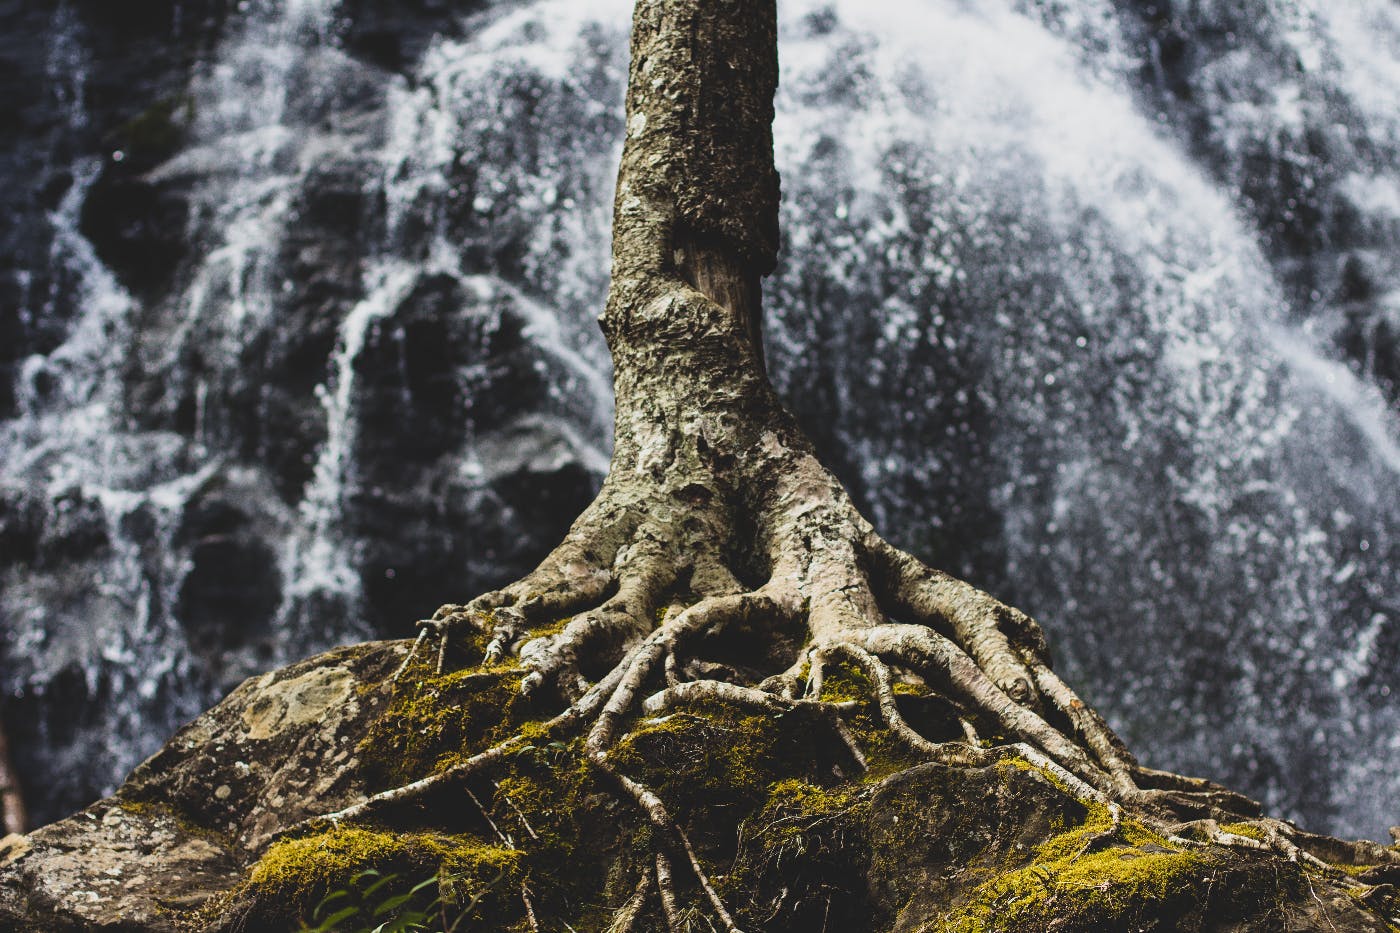 A tree with roots growing over rocks in front of a waterfall